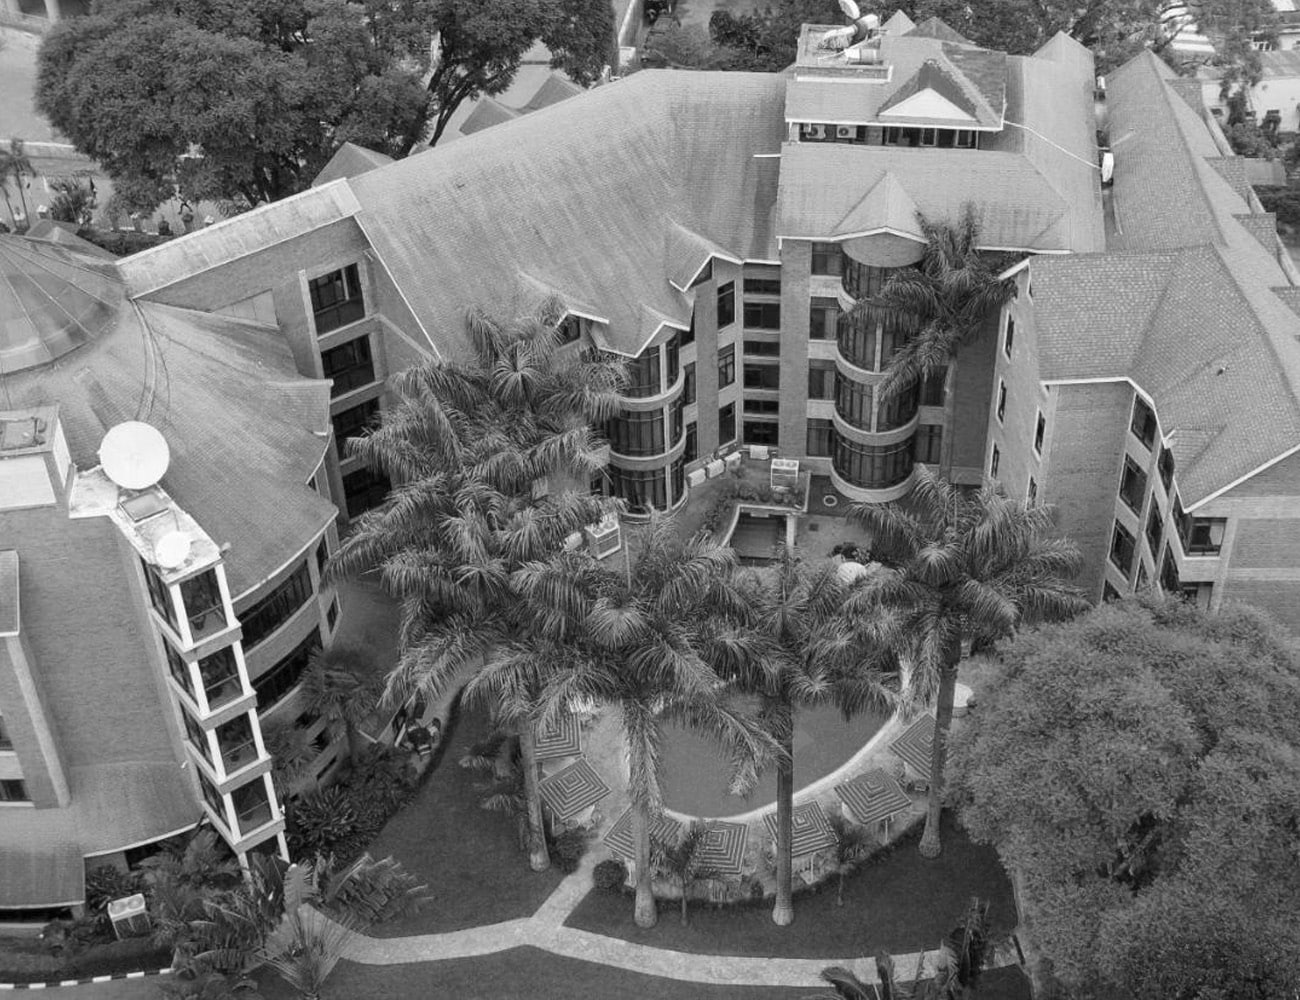 Sky View of The Kibo Palace Hotel